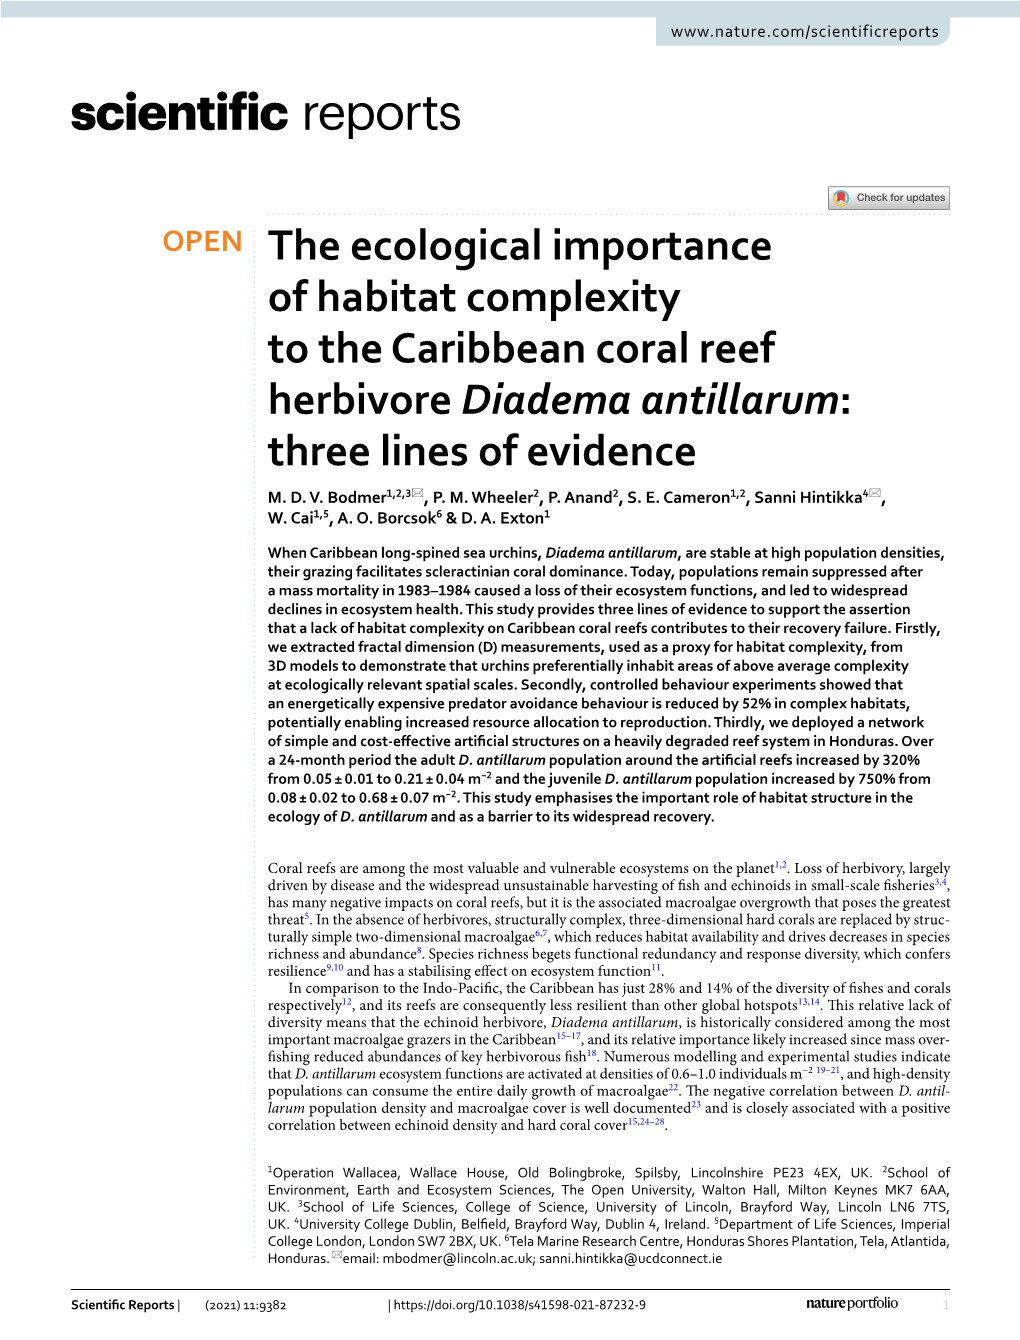 The Ecological Importance of Habitat Complexity to the Caribbean Coral Reef Herbivore Diadema Antillarum: Three Lines of Evidence M